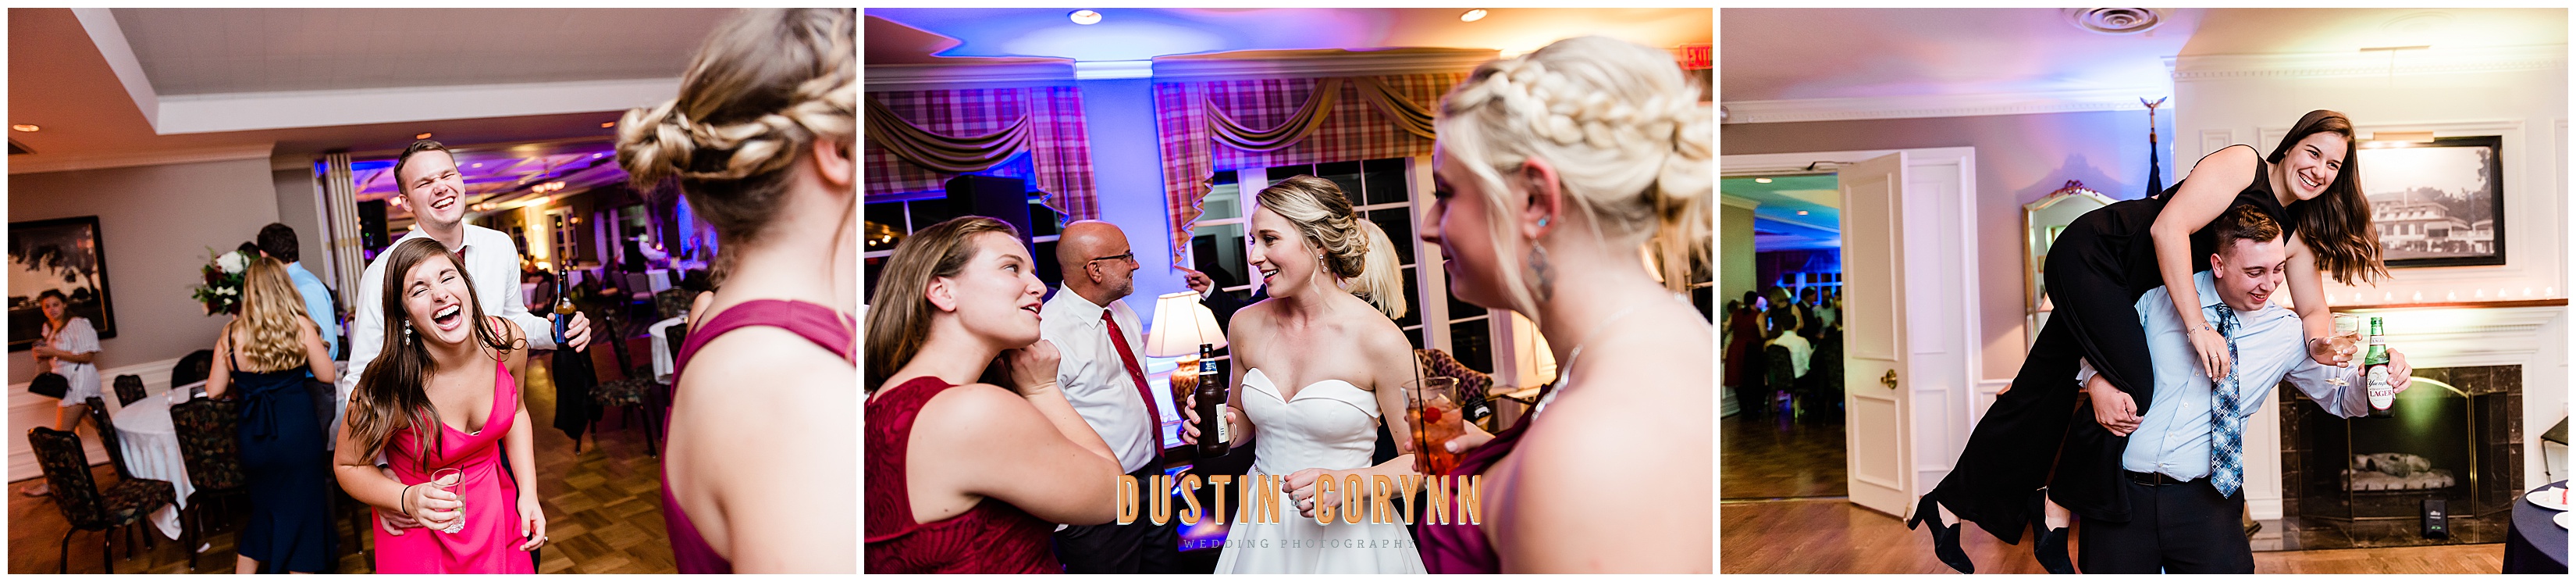 Reception and Dancing at Fort Wayne Country Club Wedding